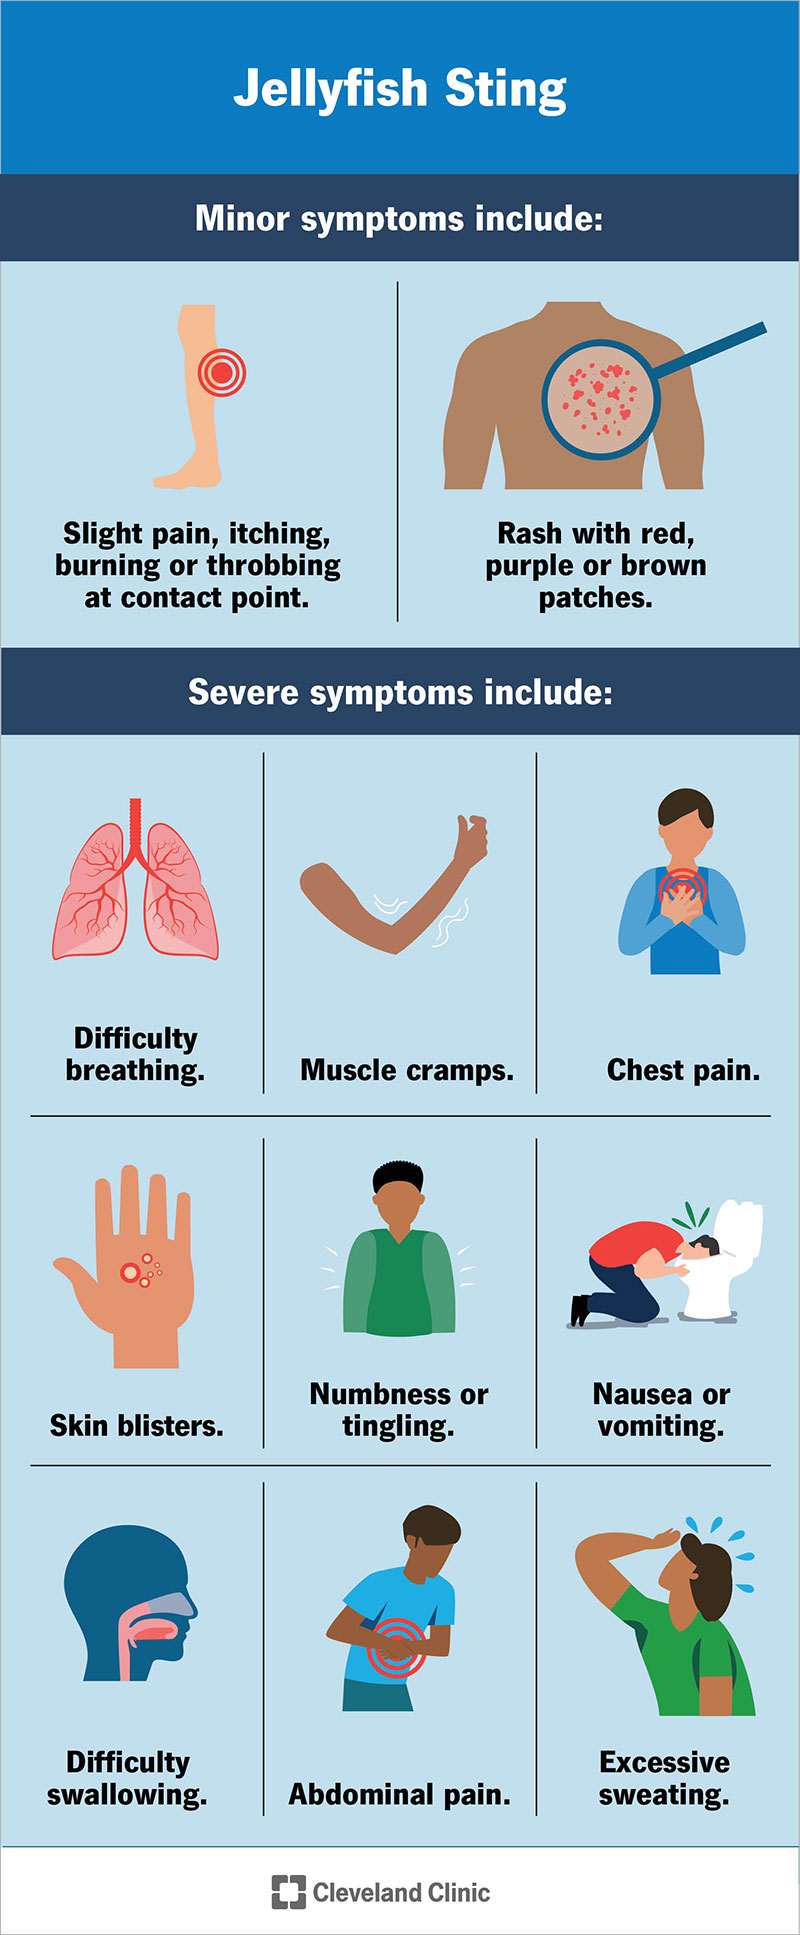 Minor symptoms of a jellyfish sting may include slight pain, itching and a rash. More serious stings can cause severe symptoms such as difficulty breathing.